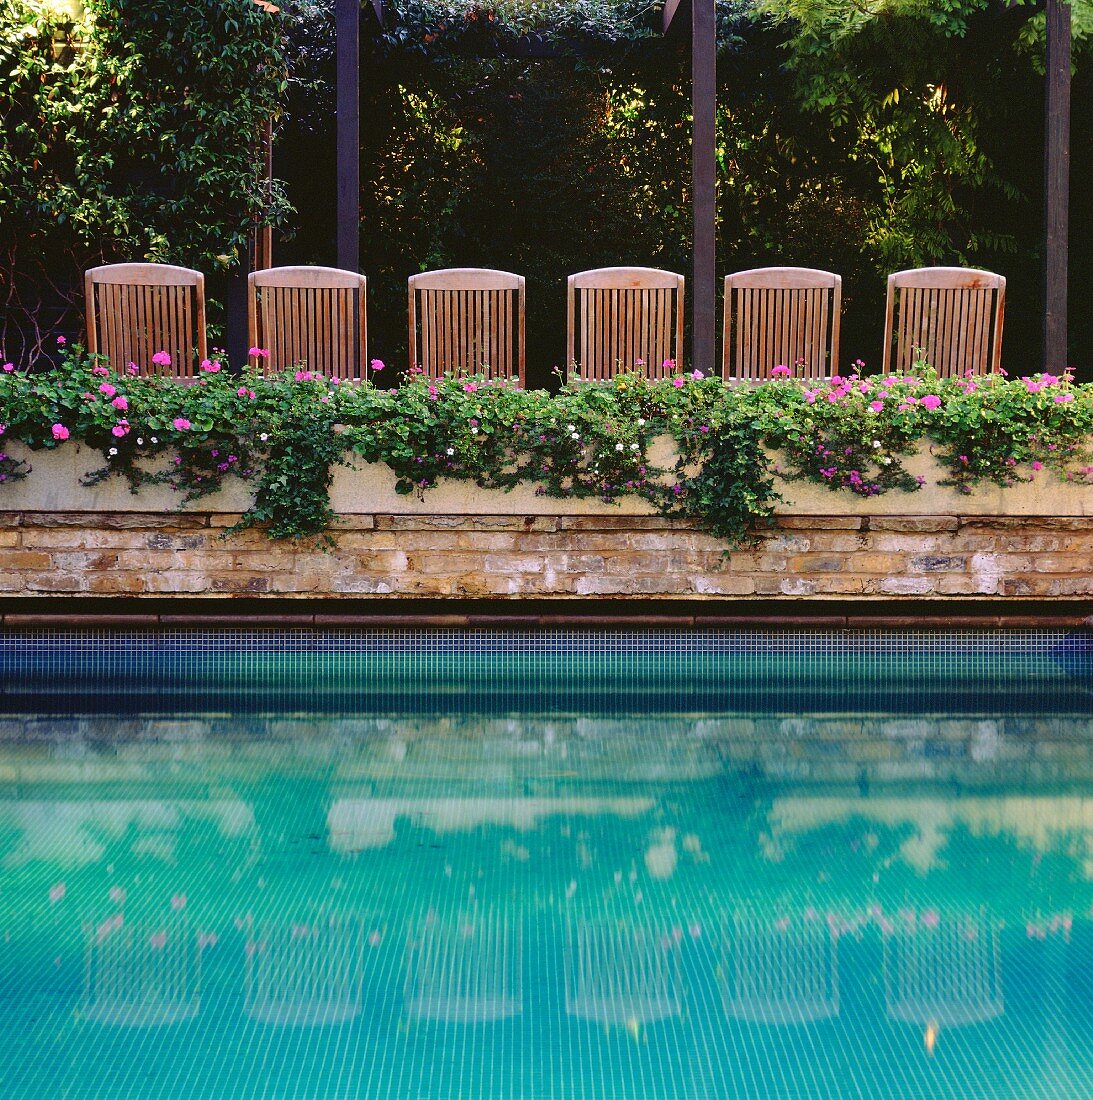 Pool surrounded by planters and deckchairs